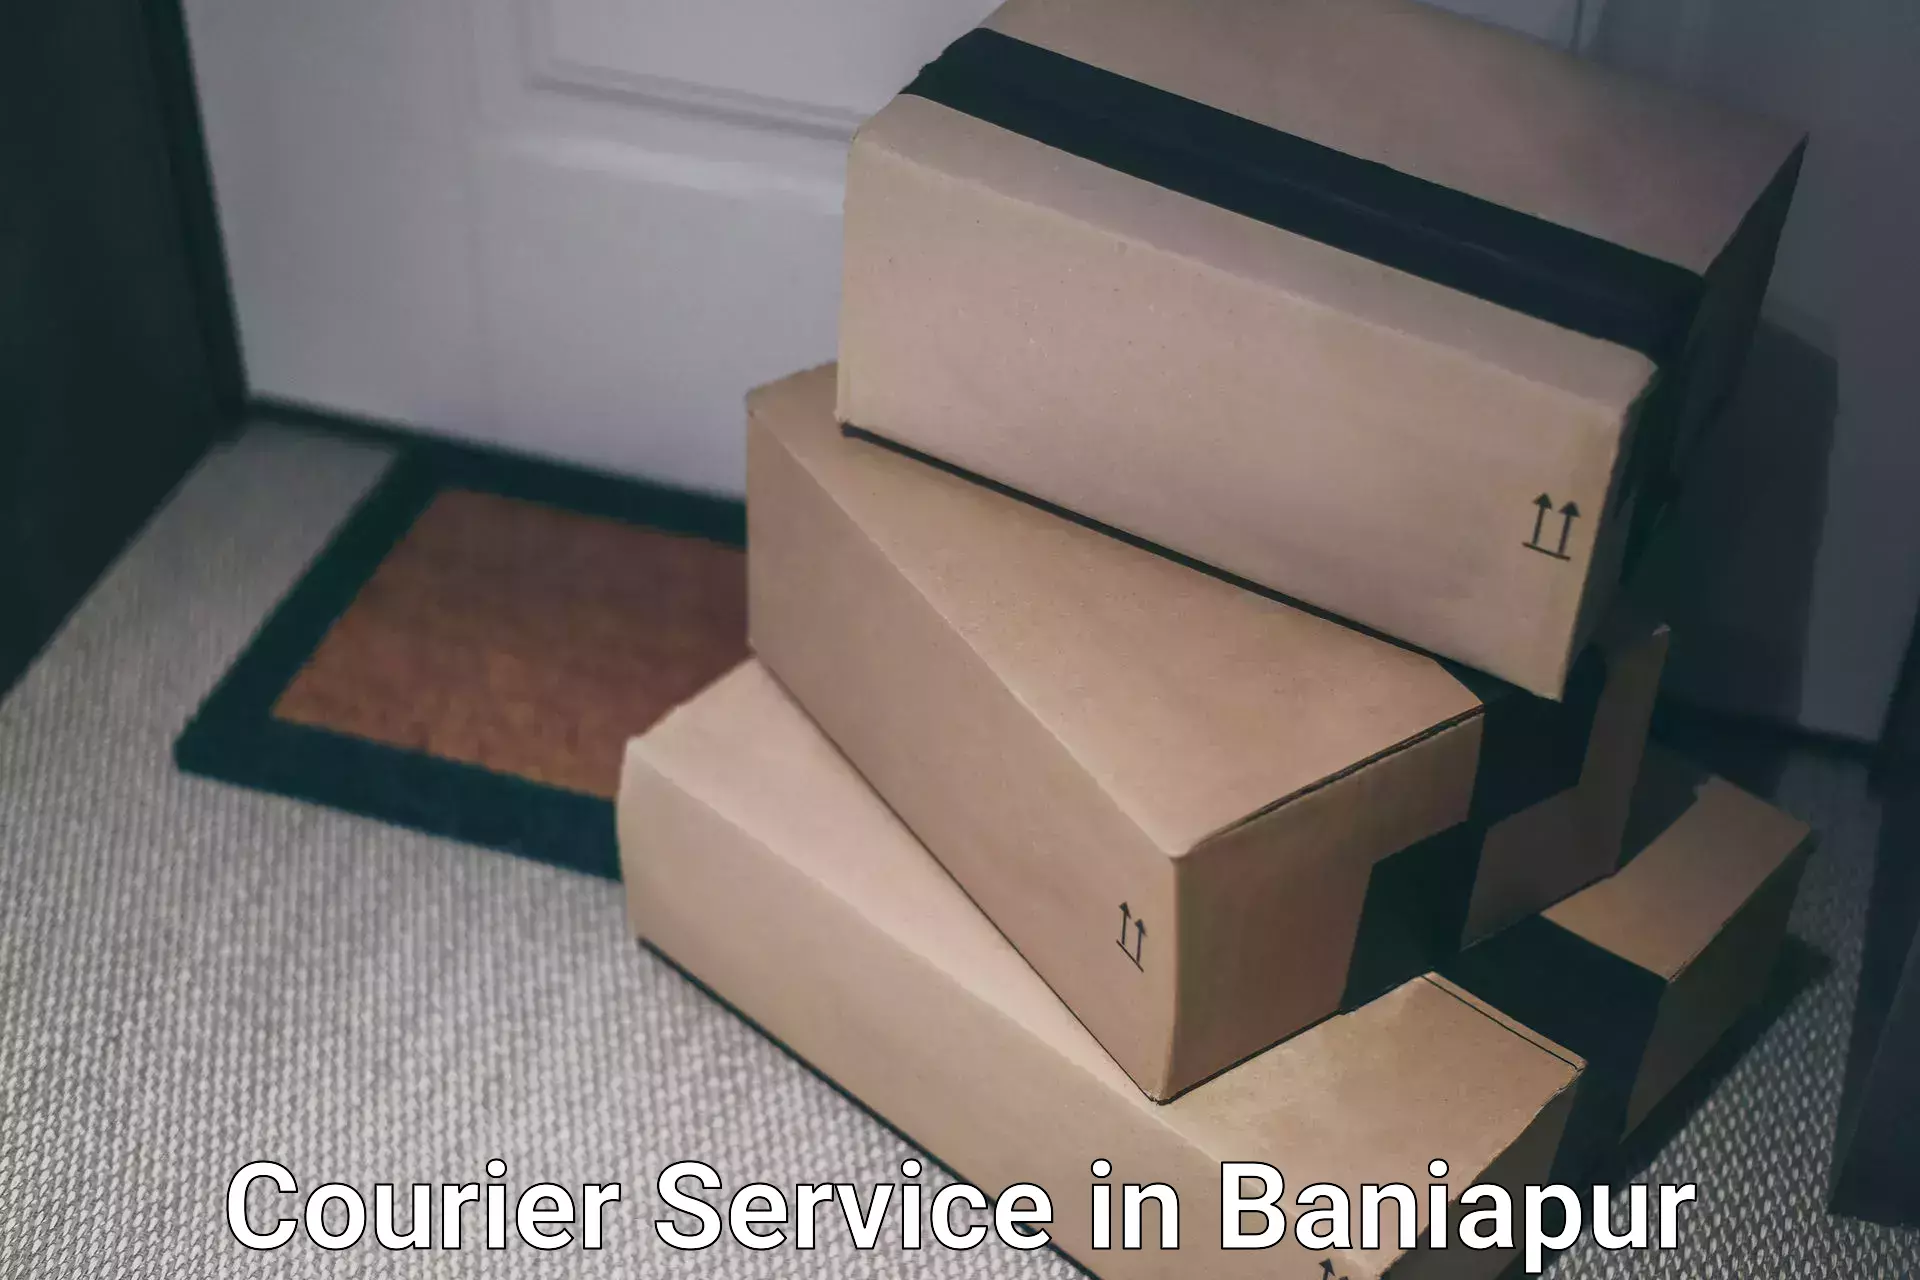 Budget-friendly shipping in Baniapur